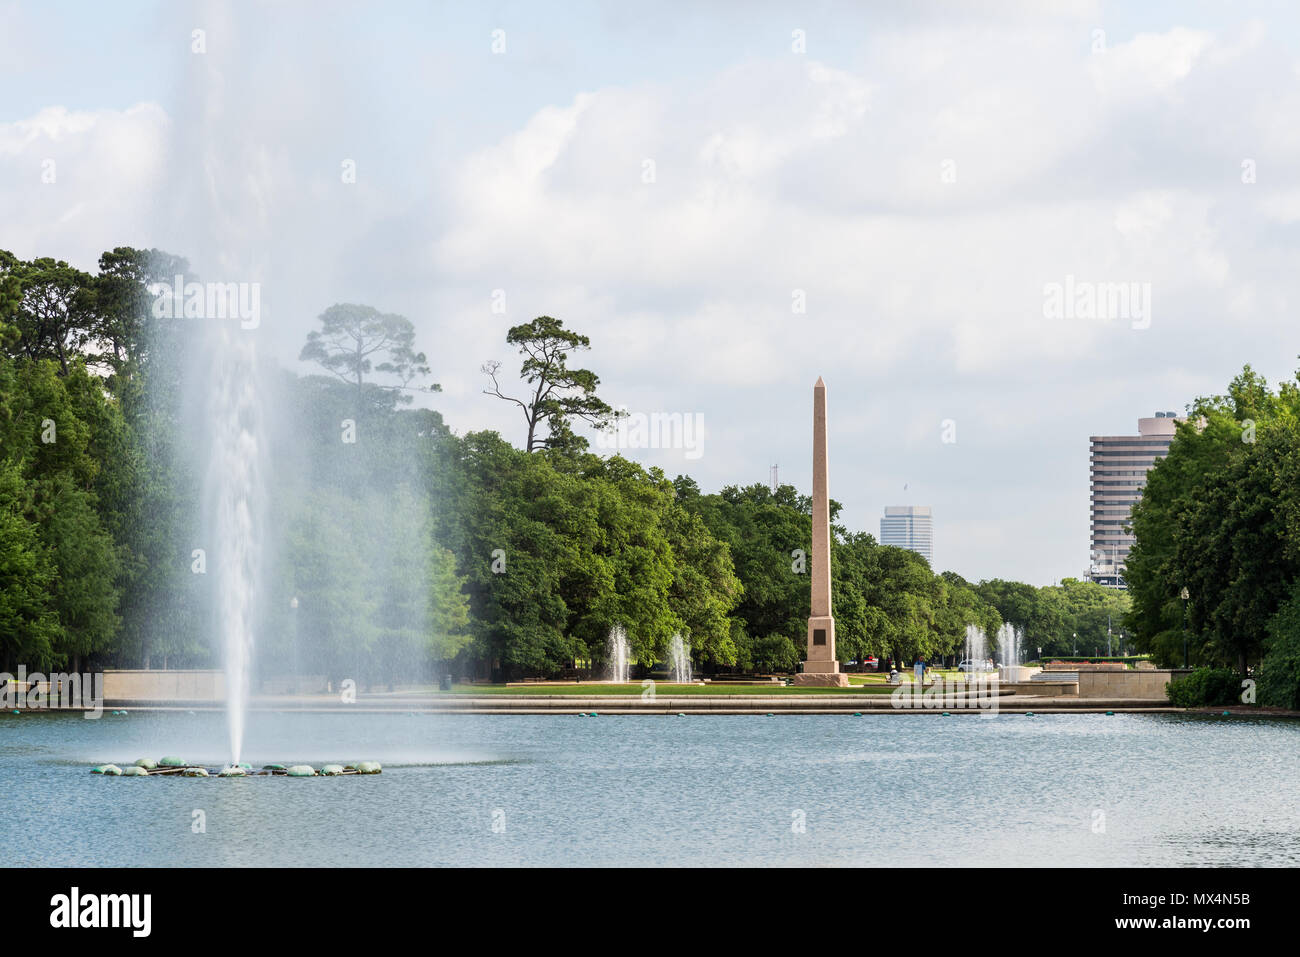 The Pioneer Memorial obelisk and water fountain at Hermann Park. Houston, Texas, USA. Stock Photo